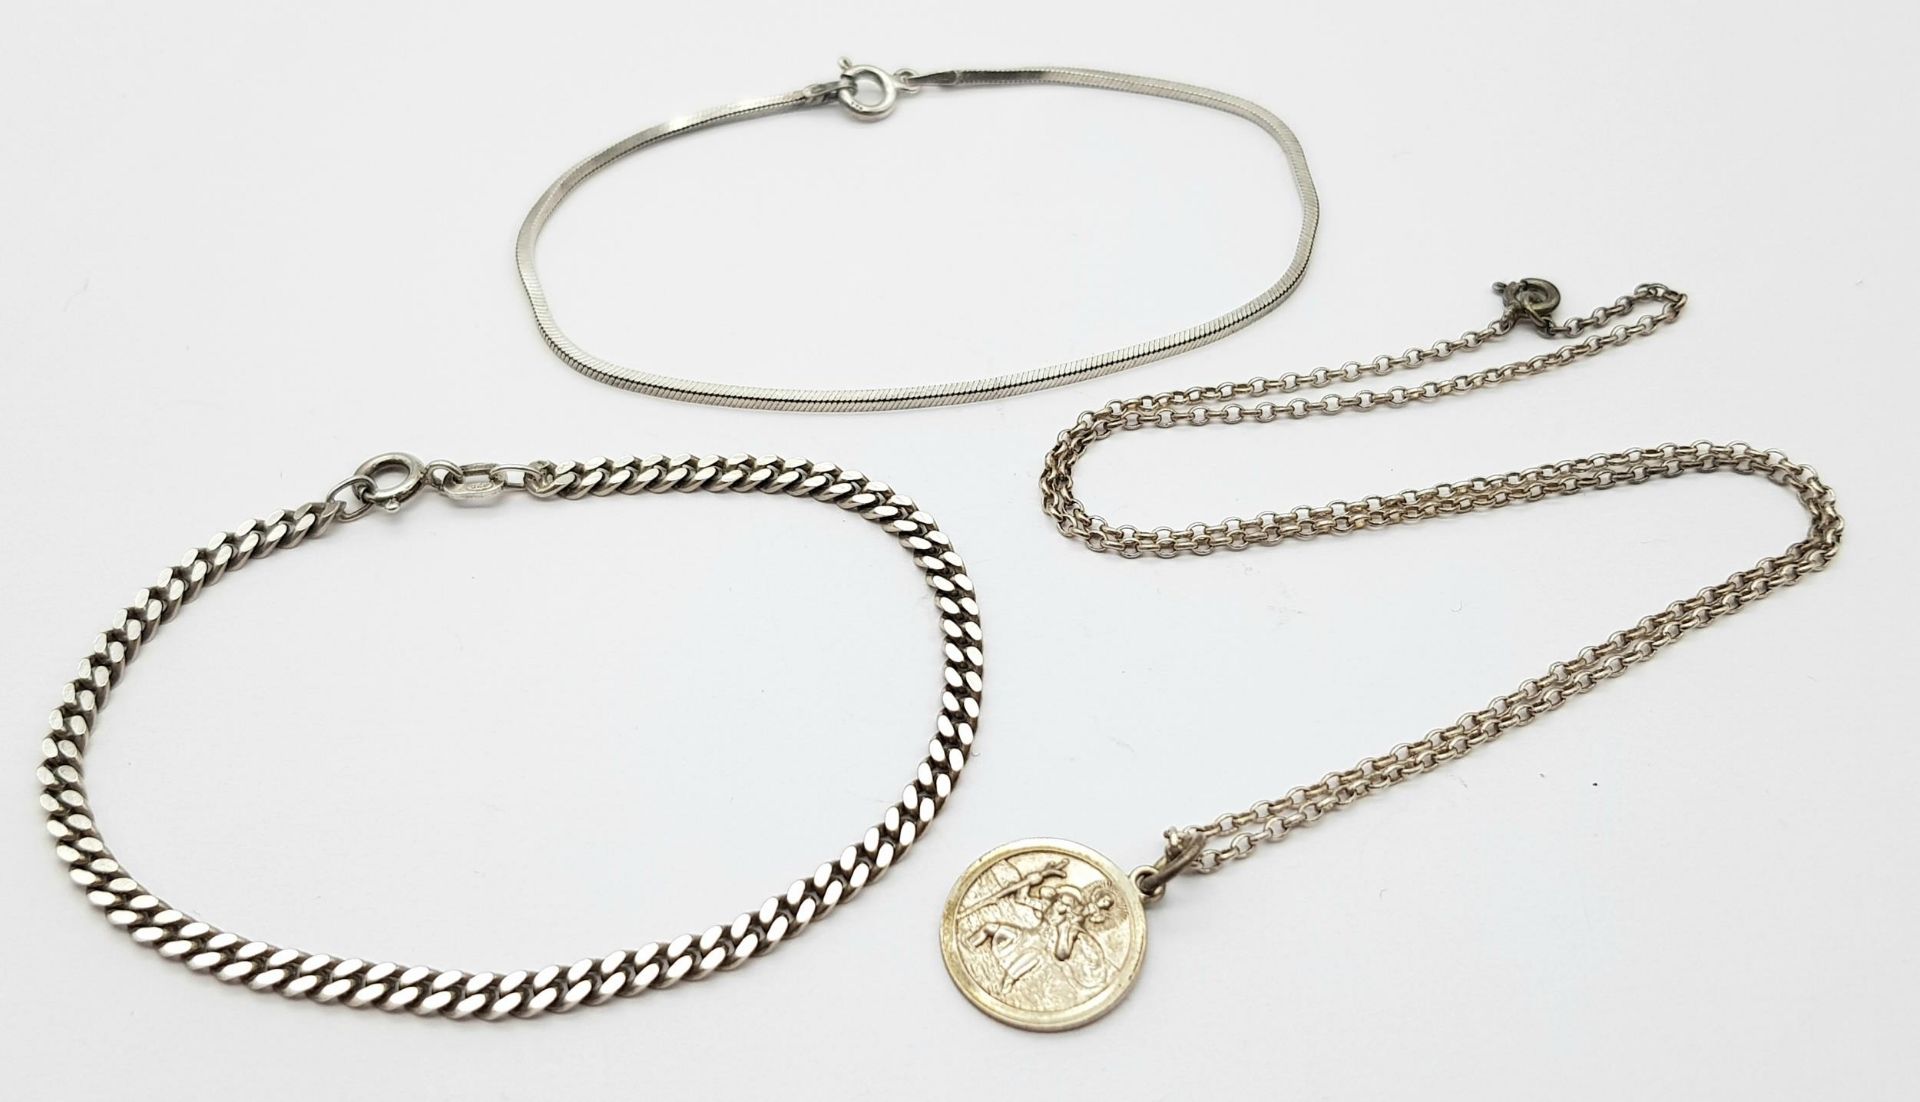 Two Sterling Silver Bracelets and Necklace with a St. Christopher Pendant. 12g - Image 2 of 5